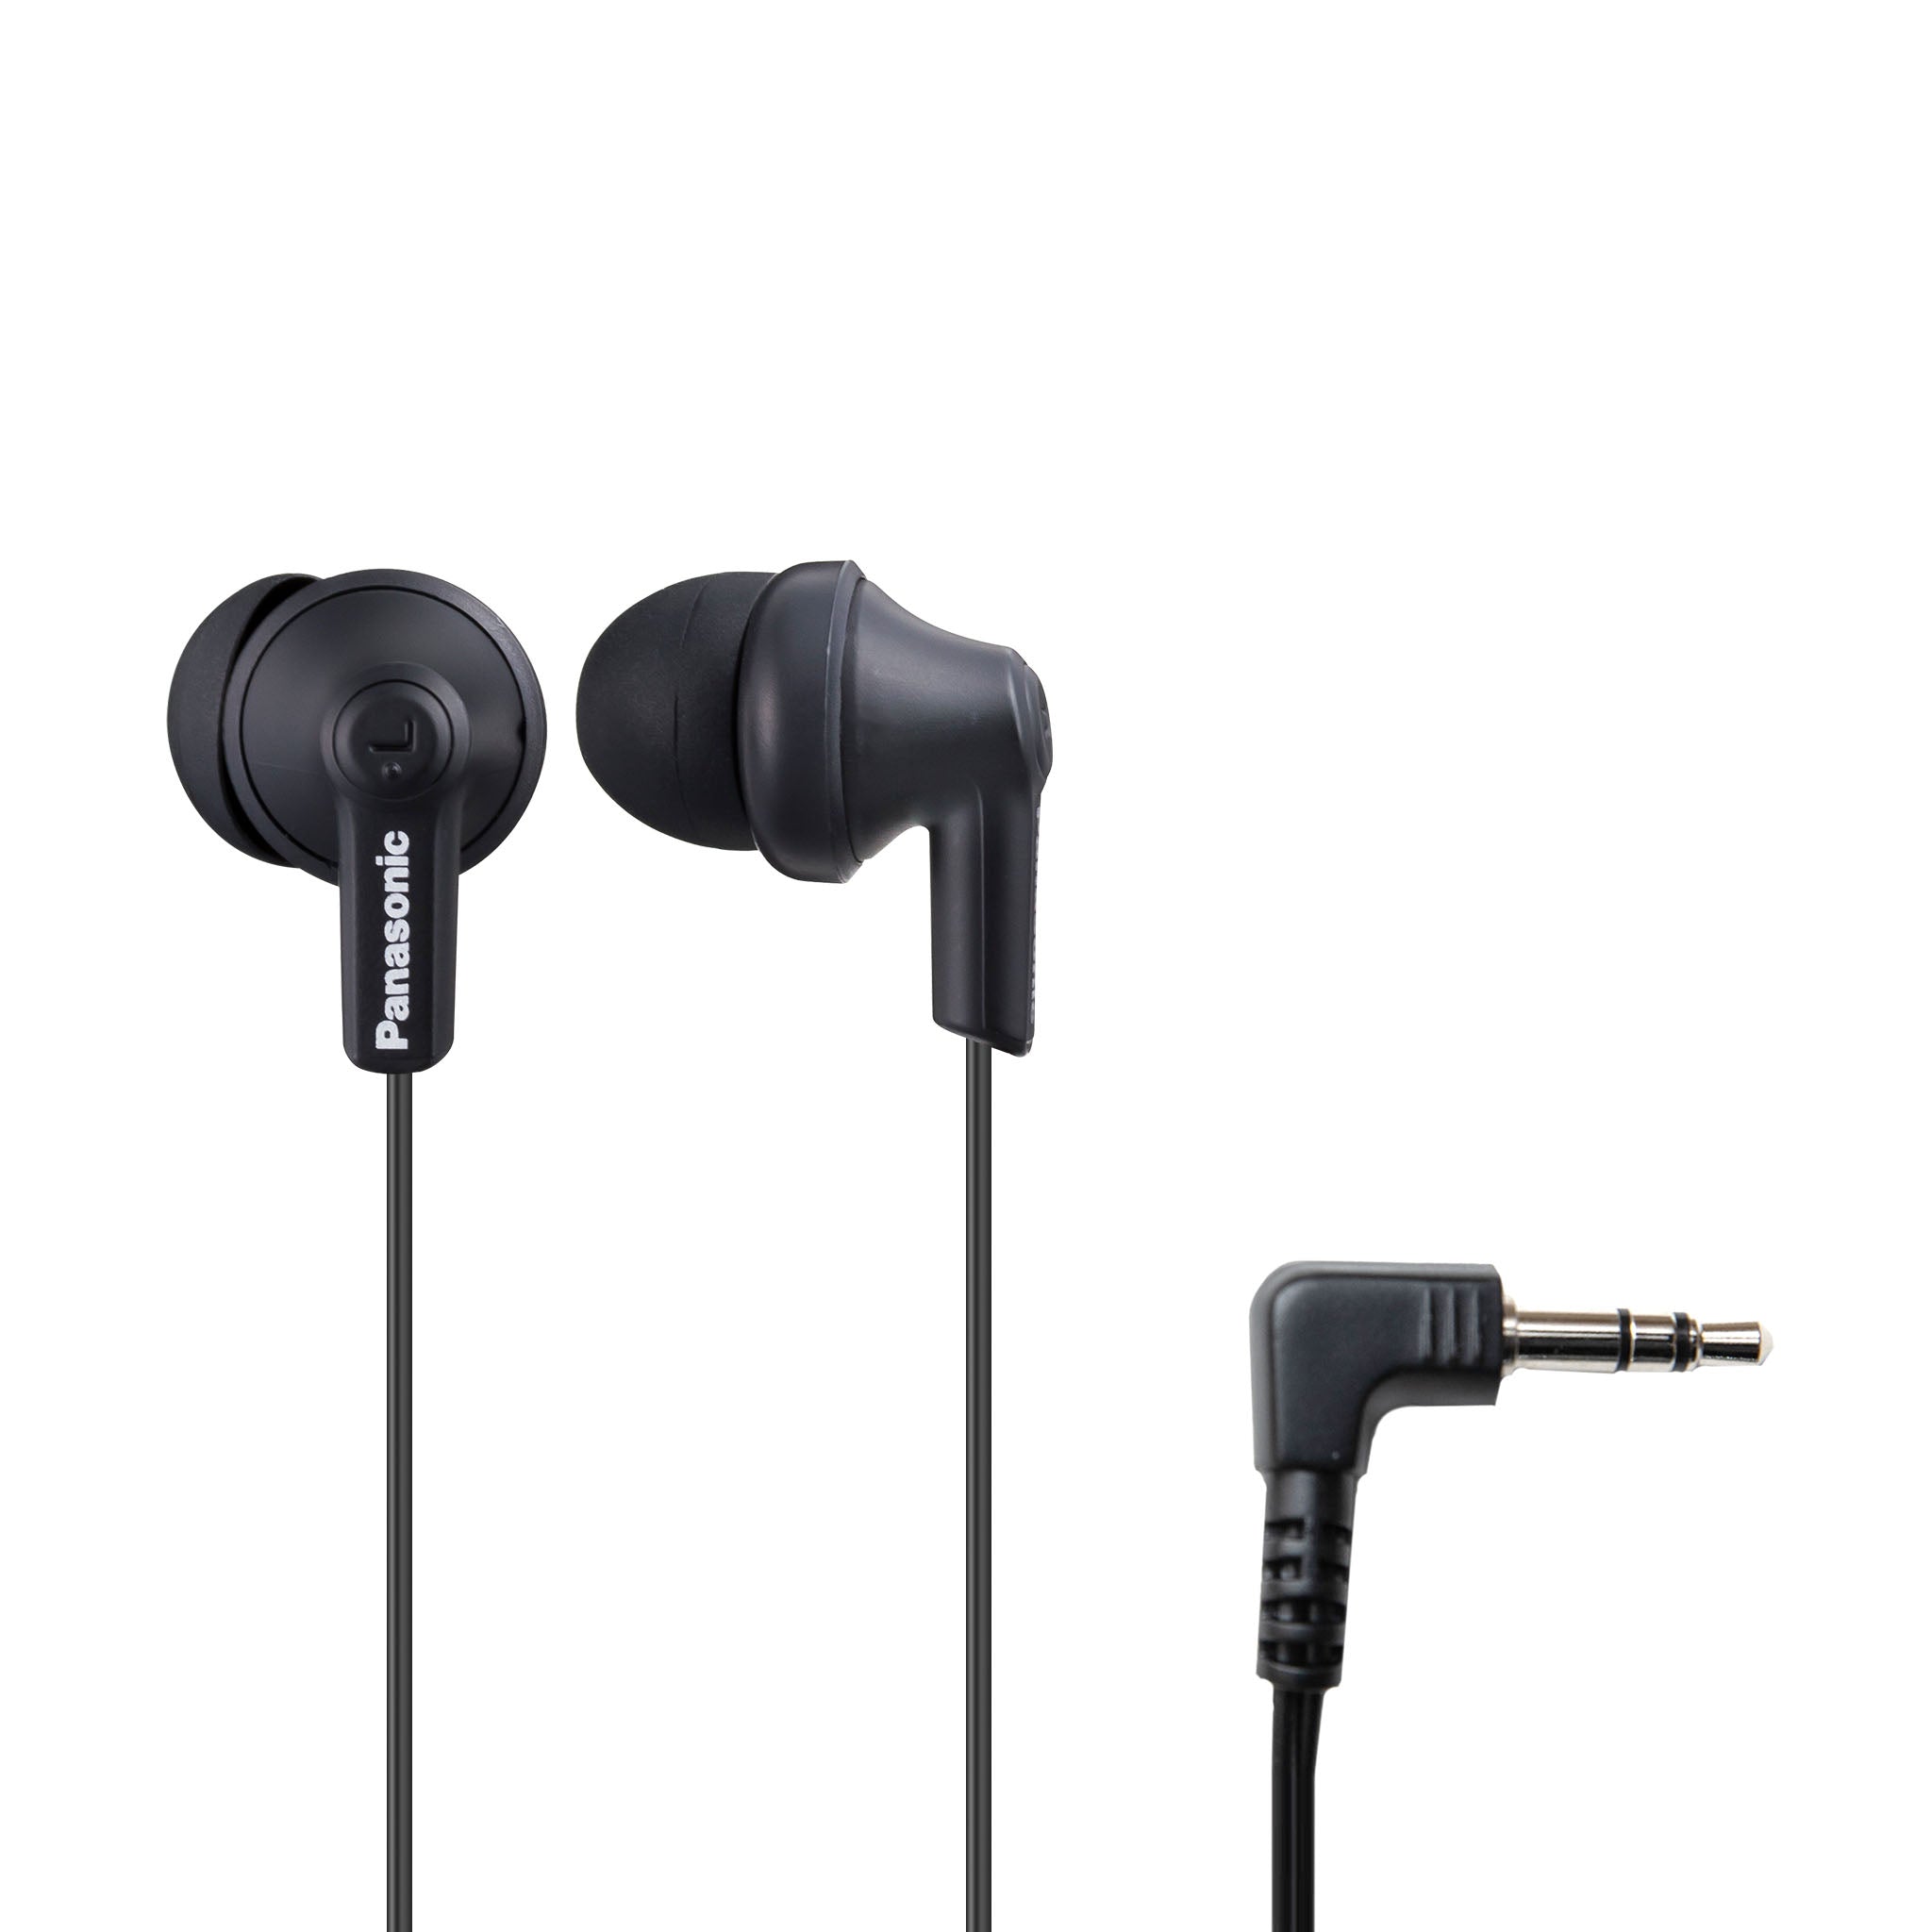 Earbud Laptops and Jack In-Ear Phones with 3.5mm for ErgoFit RP-HJE120 Panasonic Headphones -